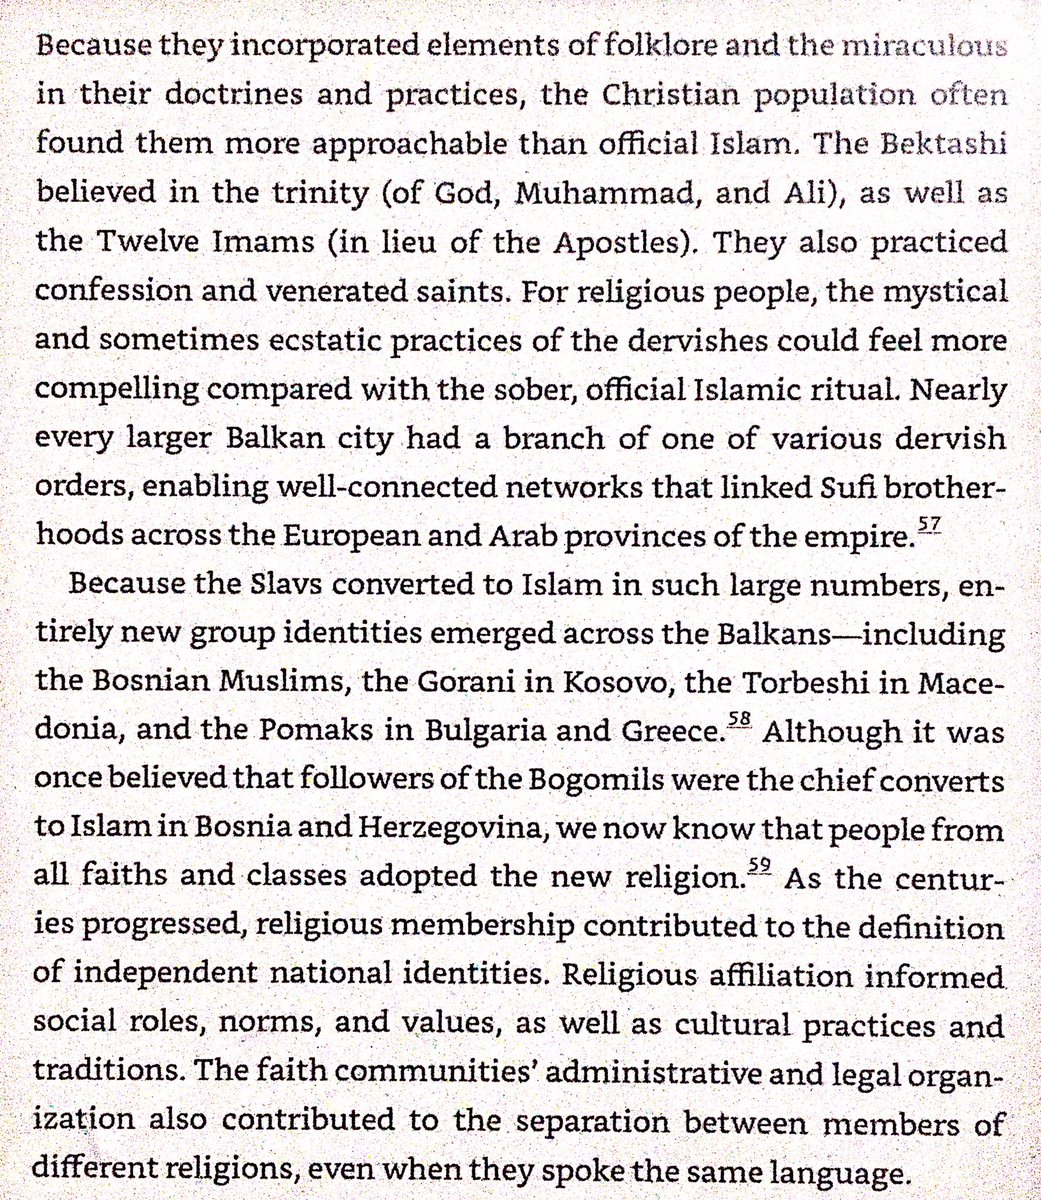 Bektashi Order & dervishes were more approachable for the Slavs than traditional Islam, so they were a major influence & conversion factor.